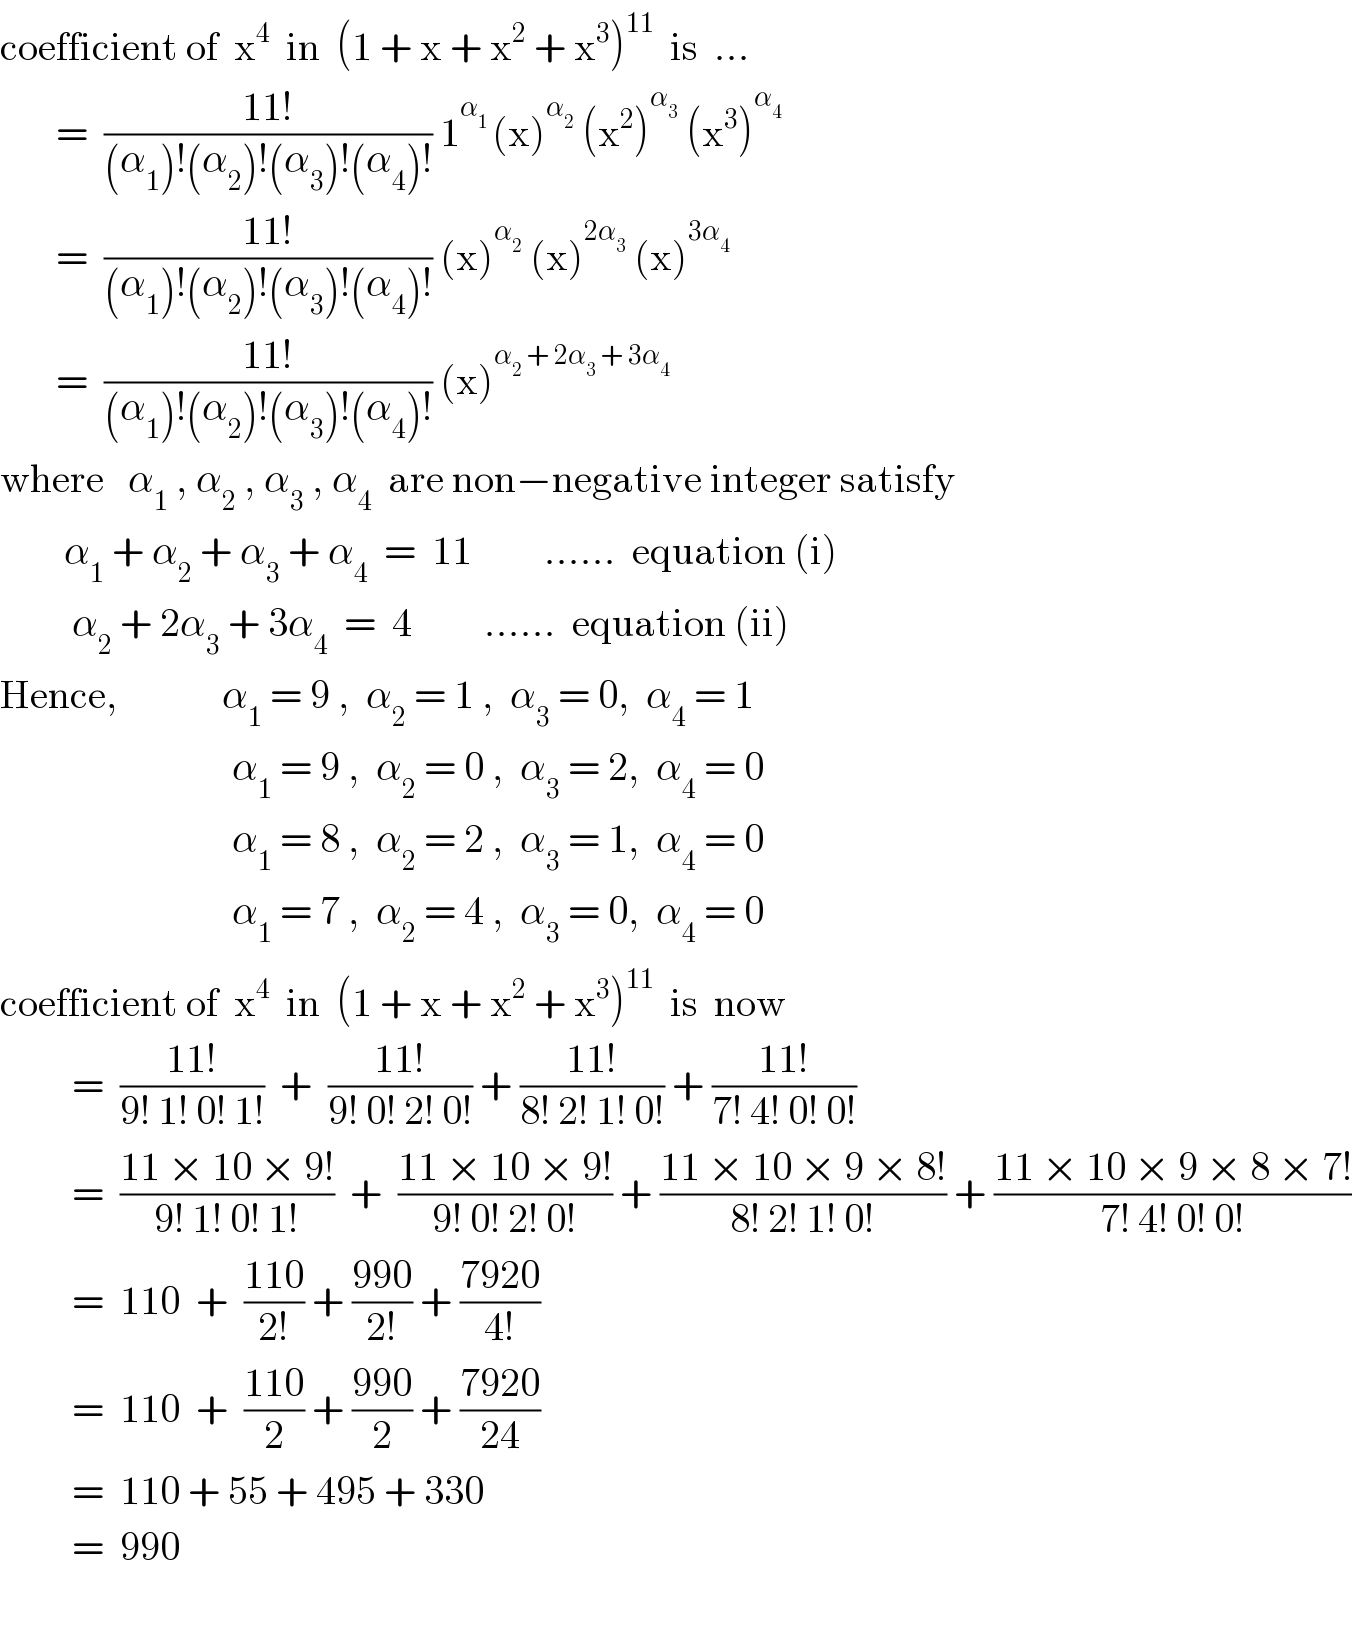 coefficient of  x^4   in  (1 + x + x^2  + x^3 )^(11)   is  ...         =  ((11!)/((α_1 )!(α_2 )!(α_3 )!(α_4 )!)) 1^(α_1  ) (x)^α_2   (x^2 )^α_3   (x^3 )^α_4           =  ((11!)/((α_1 )!(α_2 )!(α_3 )!(α_4 )!)) (x)^α_2   (x)^(2α_3 )  (x)^(3α_4 )          =  ((11!)/((α_1 )!(α_2 )!(α_3 )!(α_4 )!)) (x)^(α_2  + 2α_3  + 3α_4 )   where   α_1  , α_2  , α_3  , α_4   are non−negative integer satisfy           α_1  + α_2  + α_3  + α_4   =  11         ......  equation (i)           α_2  + 2α_3  + 3α_4   =  4         ......  equation (ii)  Hence,             α_1  = 9 ,  α_2  = 1 ,  α_3  = 0,  α_4  = 1                               α_1  = 9 ,  α_2  = 0 ,  α_3  = 2,  α_4  = 0                               α_1  = 8 ,  α_2  = 2 ,  α_3  = 1,  α_4  = 0                               α_1  = 7 ,  α_2  = 4 ,  α_3  = 0,  α_4  = 0  coefficient of  x^4   in  (1 + x + x^2  + x^3 )^(11)   is  now           =  ((11!)/(9! 1! 0! 1!))  +  ((11!)/(9! 0! 2! 0!)) + ((11!)/(8! 2! 1! 0!)) + ((11!)/(7! 4! 0! 0!))           =  ((11 × 10 × 9!)/(9! 1! 0! 1!))  +  ((11 × 10 × 9!)/(9! 0! 2! 0!)) + ((11 × 10 × 9 × 8!)/(8! 2! 1! 0!)) + ((11 × 10 × 9 × 8 × 7!)/(7! 4! 0! 0!))           =  110  +  ((110)/(2!)) + ((990)/(2!)) + ((7920)/(4!))           =  110  +  ((110)/2) + ((990)/2) + ((7920)/(24))           =  110 + 55 + 495 + 330           =  990    